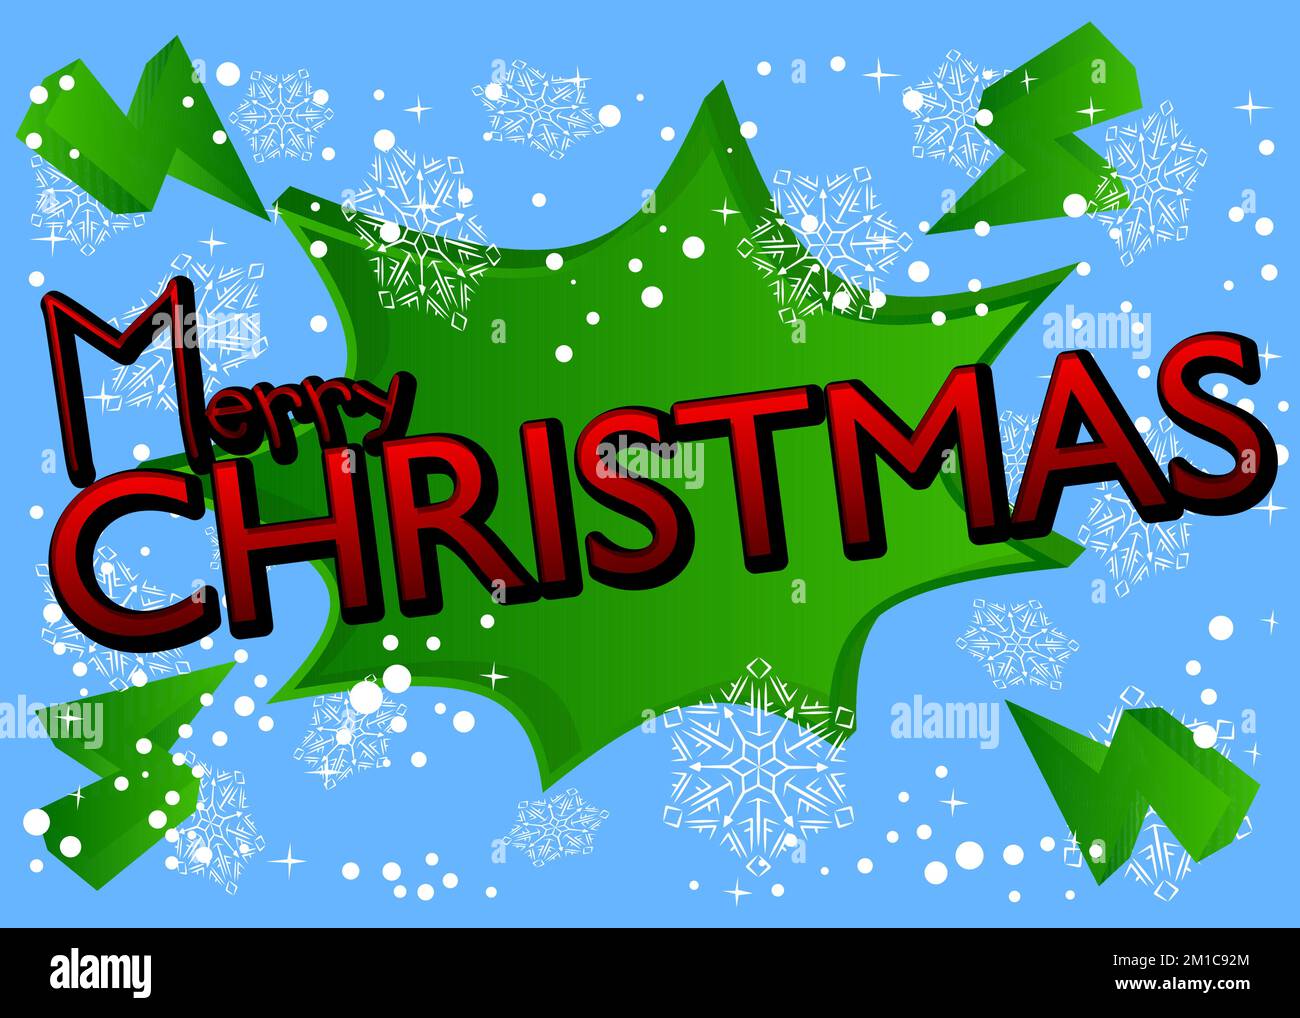 Snowflake background with Merry Christmas text. Holiday event poster, Winter, Snow, Christmas banner. Stock Vector